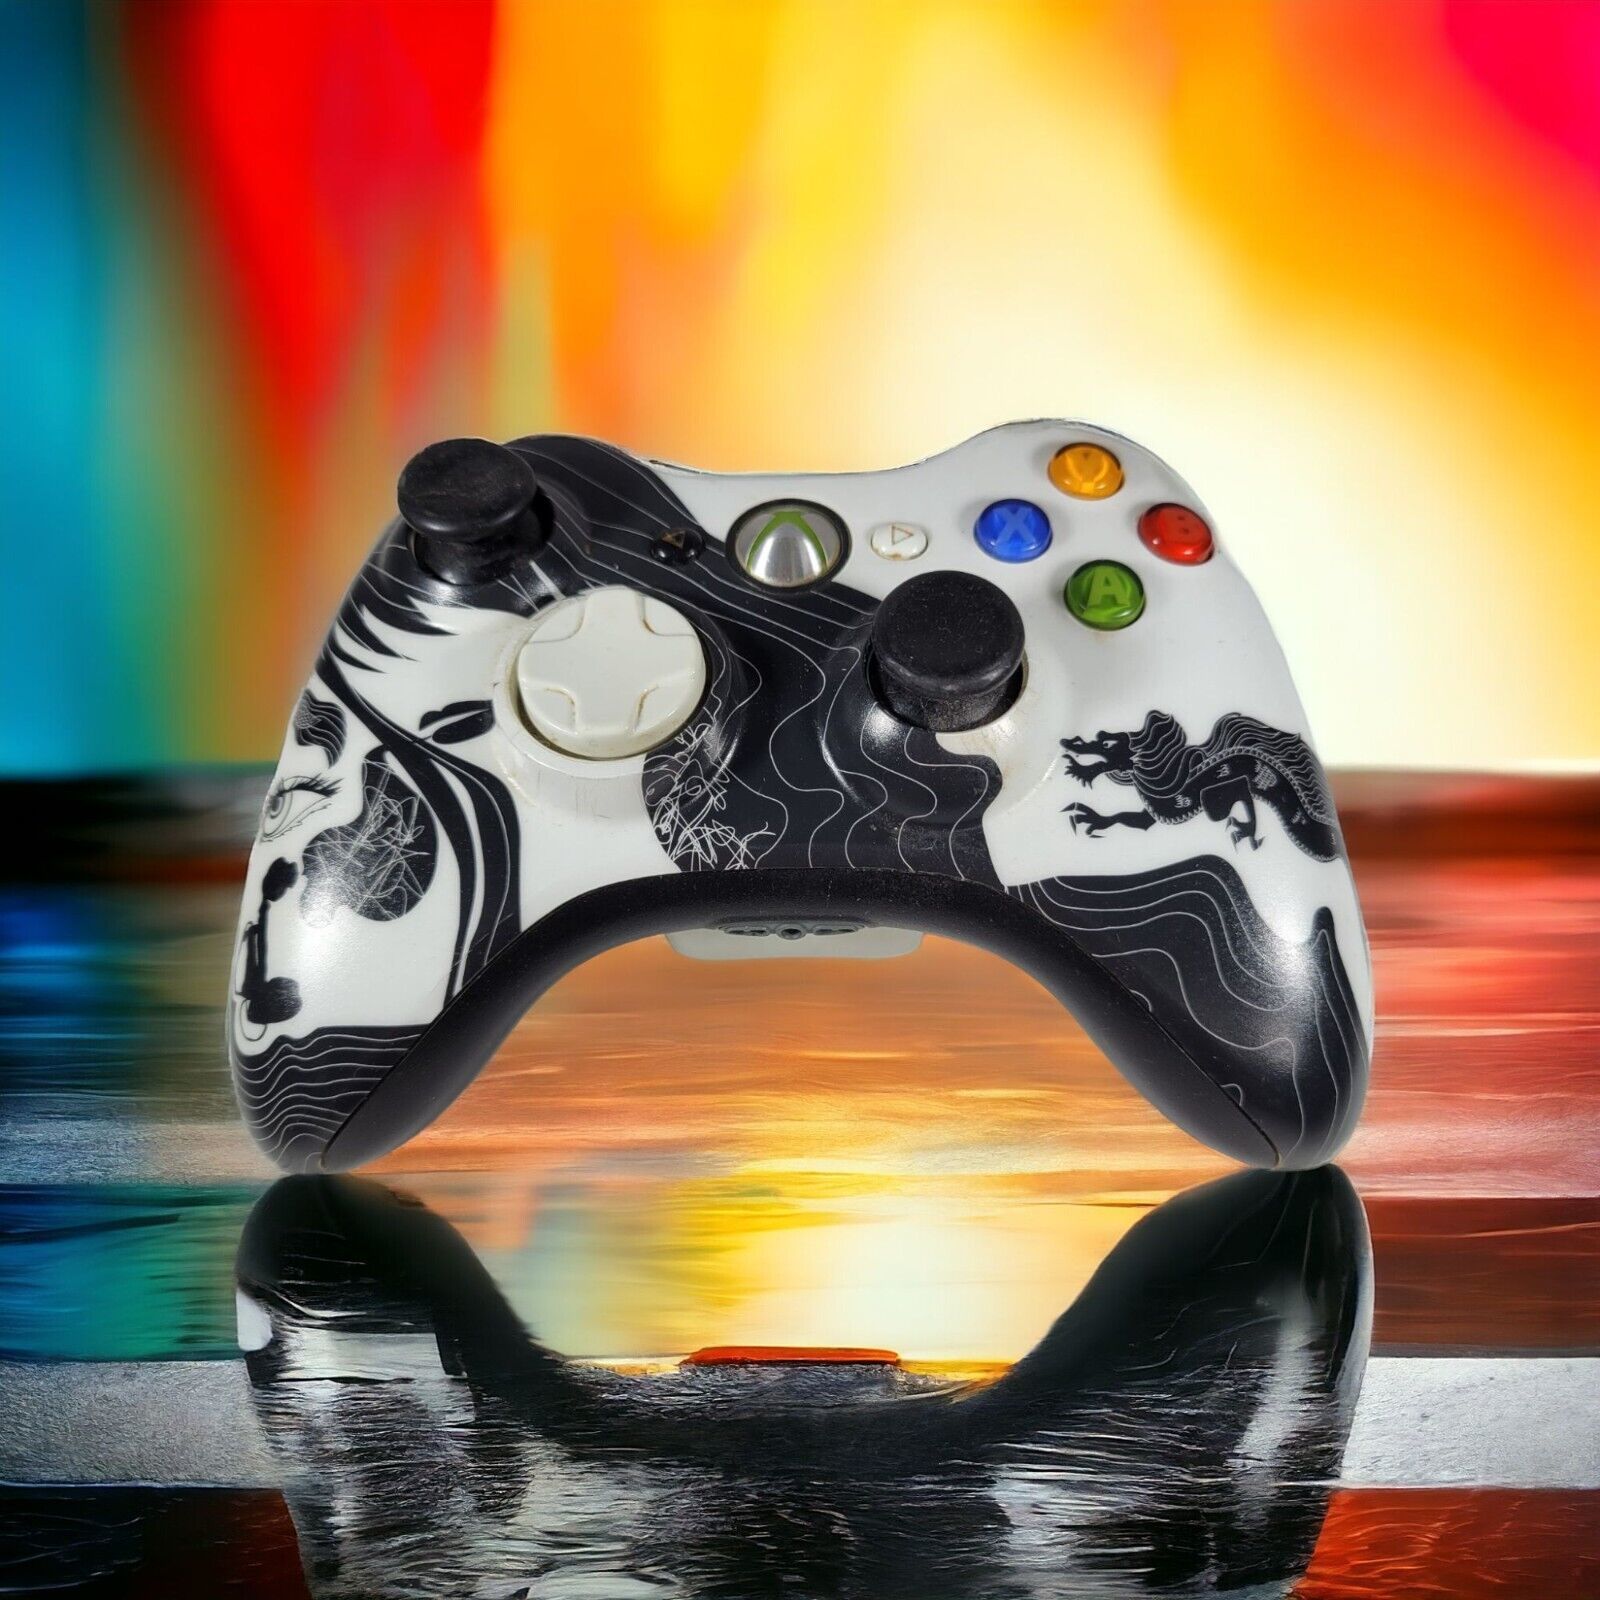 XBox 360 Wireless Limited Edition Dragon Age Black & White Controller TESTED - $34.13